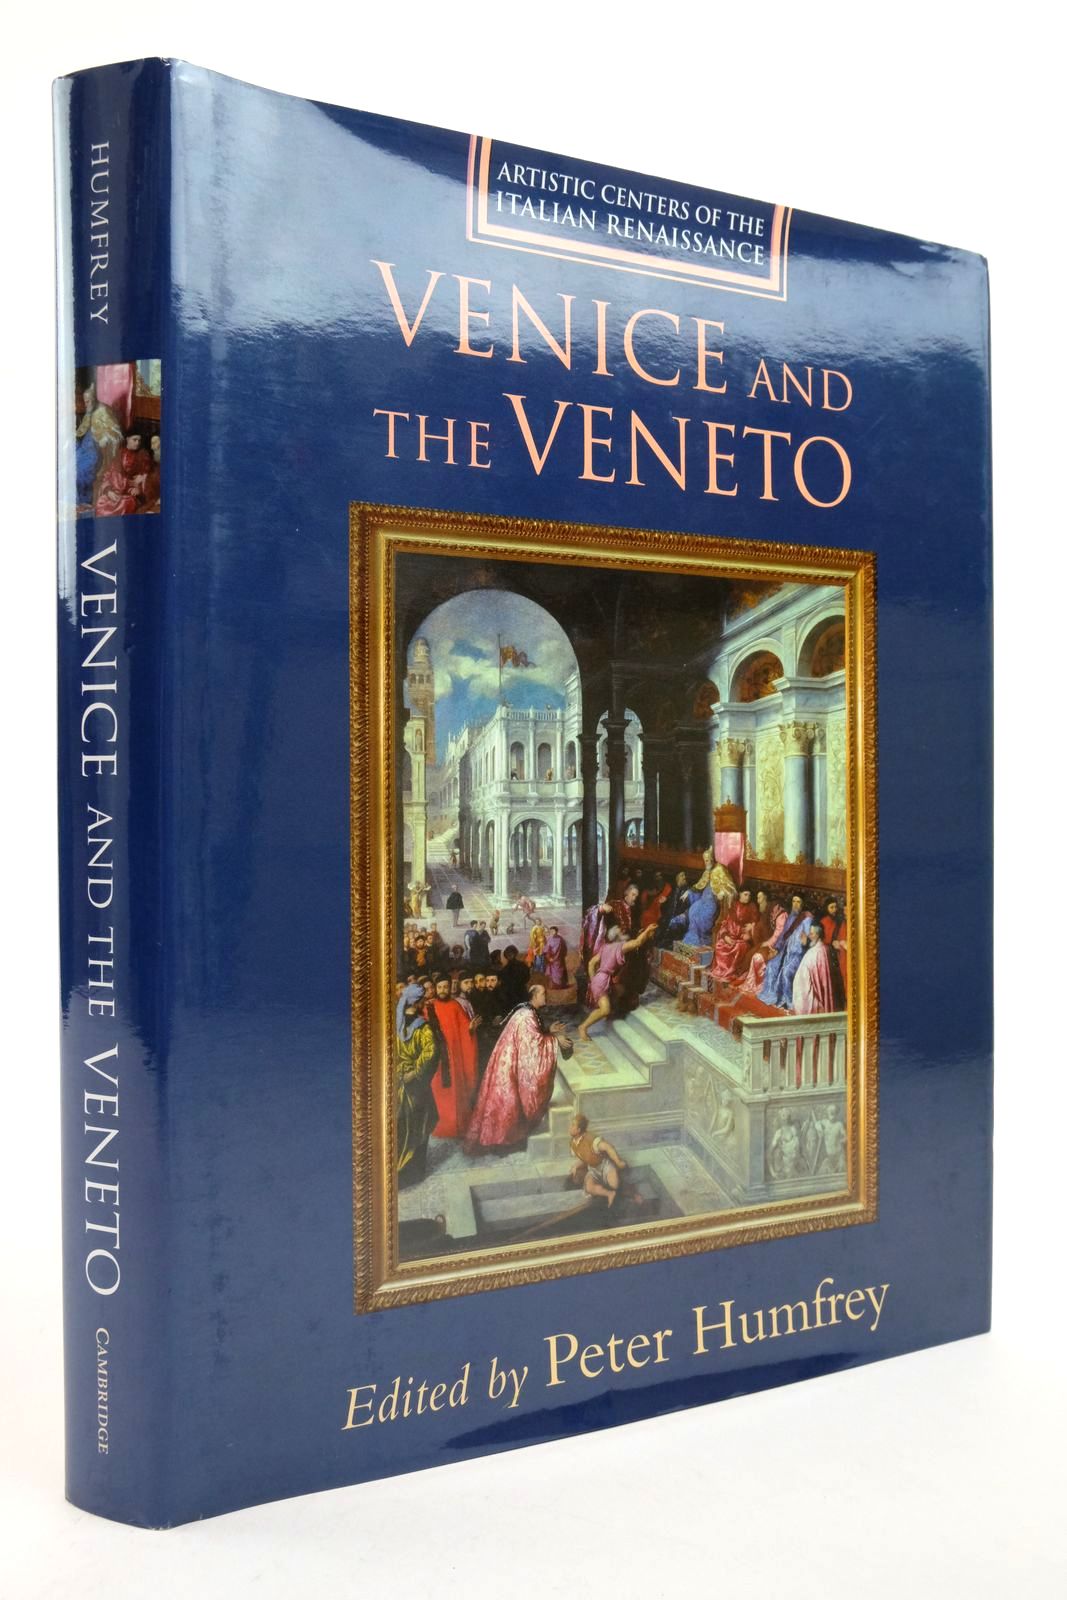 Photo of VENICE AND THE VENETO written by Humfrey, Peter published by Cambridge University Press (STOCK CODE: 2138868)  for sale by Stella & Rose's Books